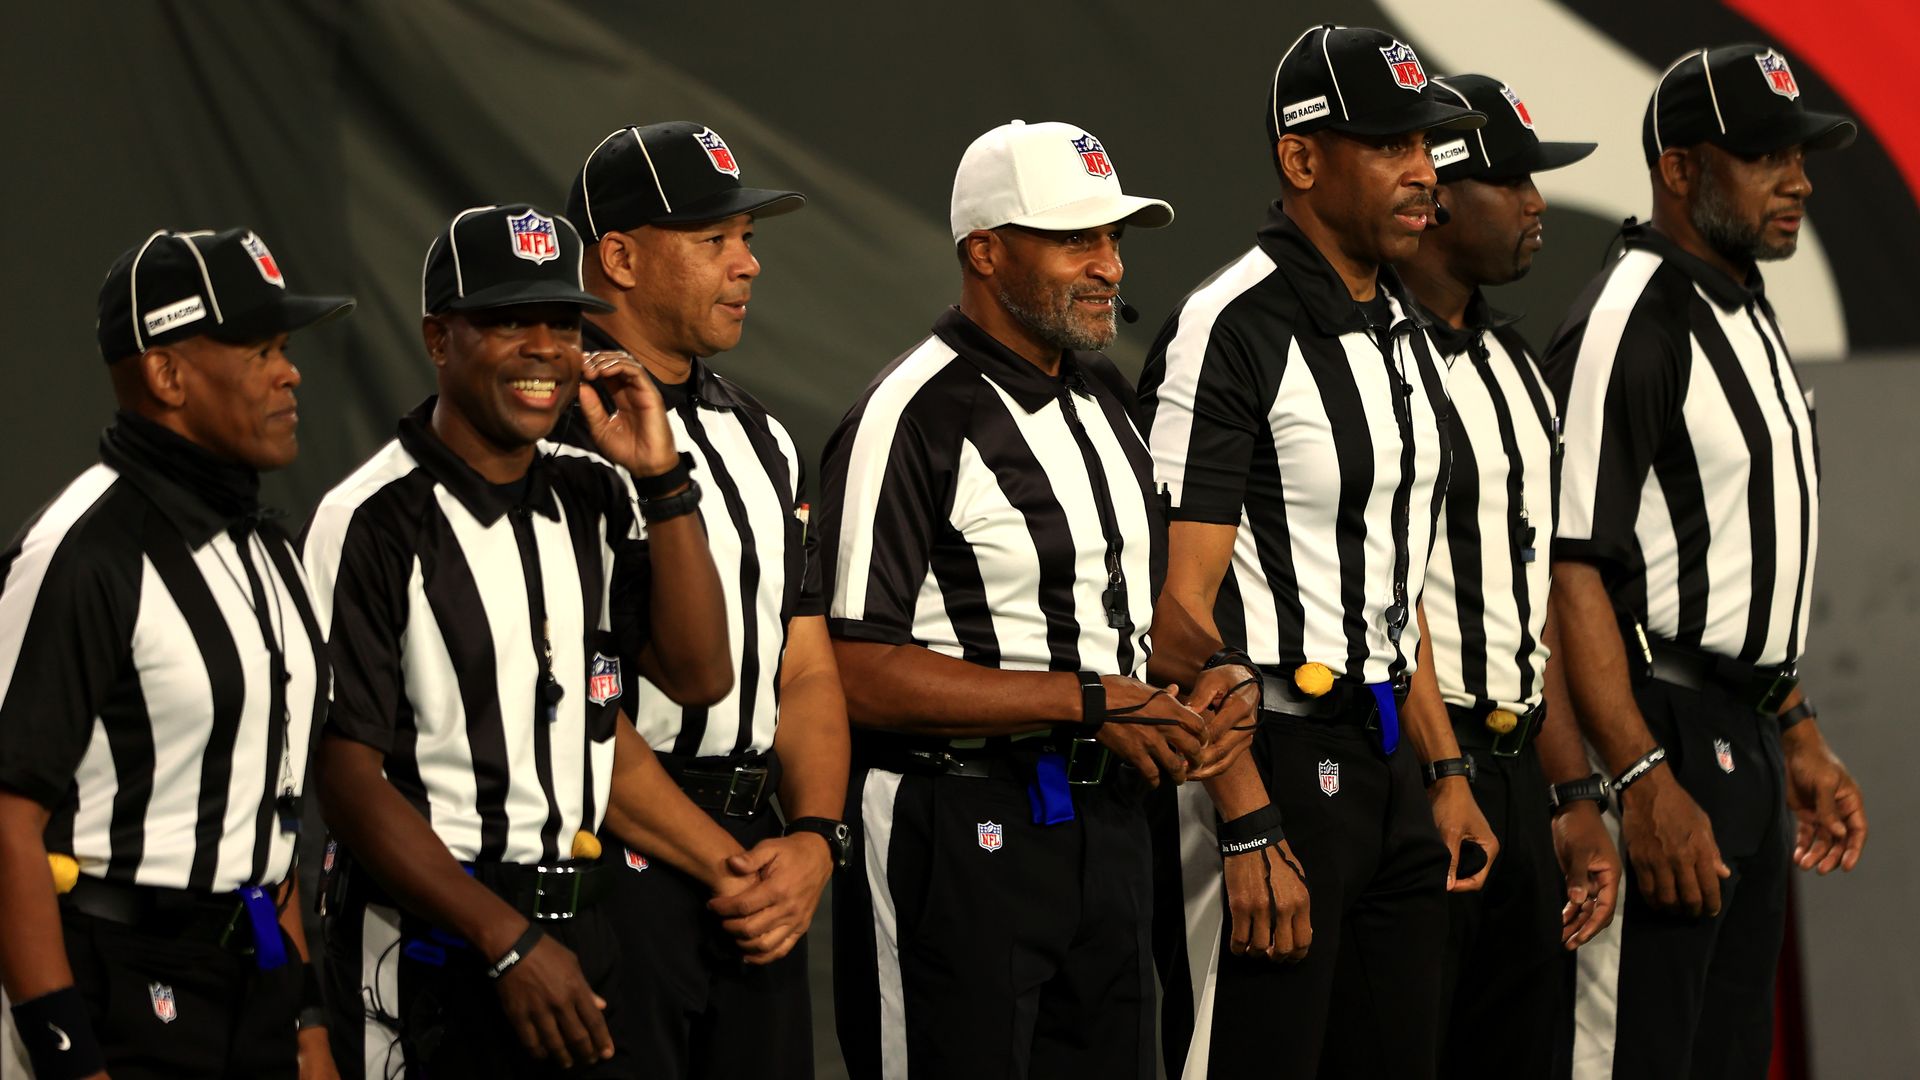 The first all-Black officiating crew works tonight’s football game between the Tampa Bay Buccaneers and the Los Angeles Rams at Raymond James Stadium on November 23, 2020 in Tampa, Florida. 